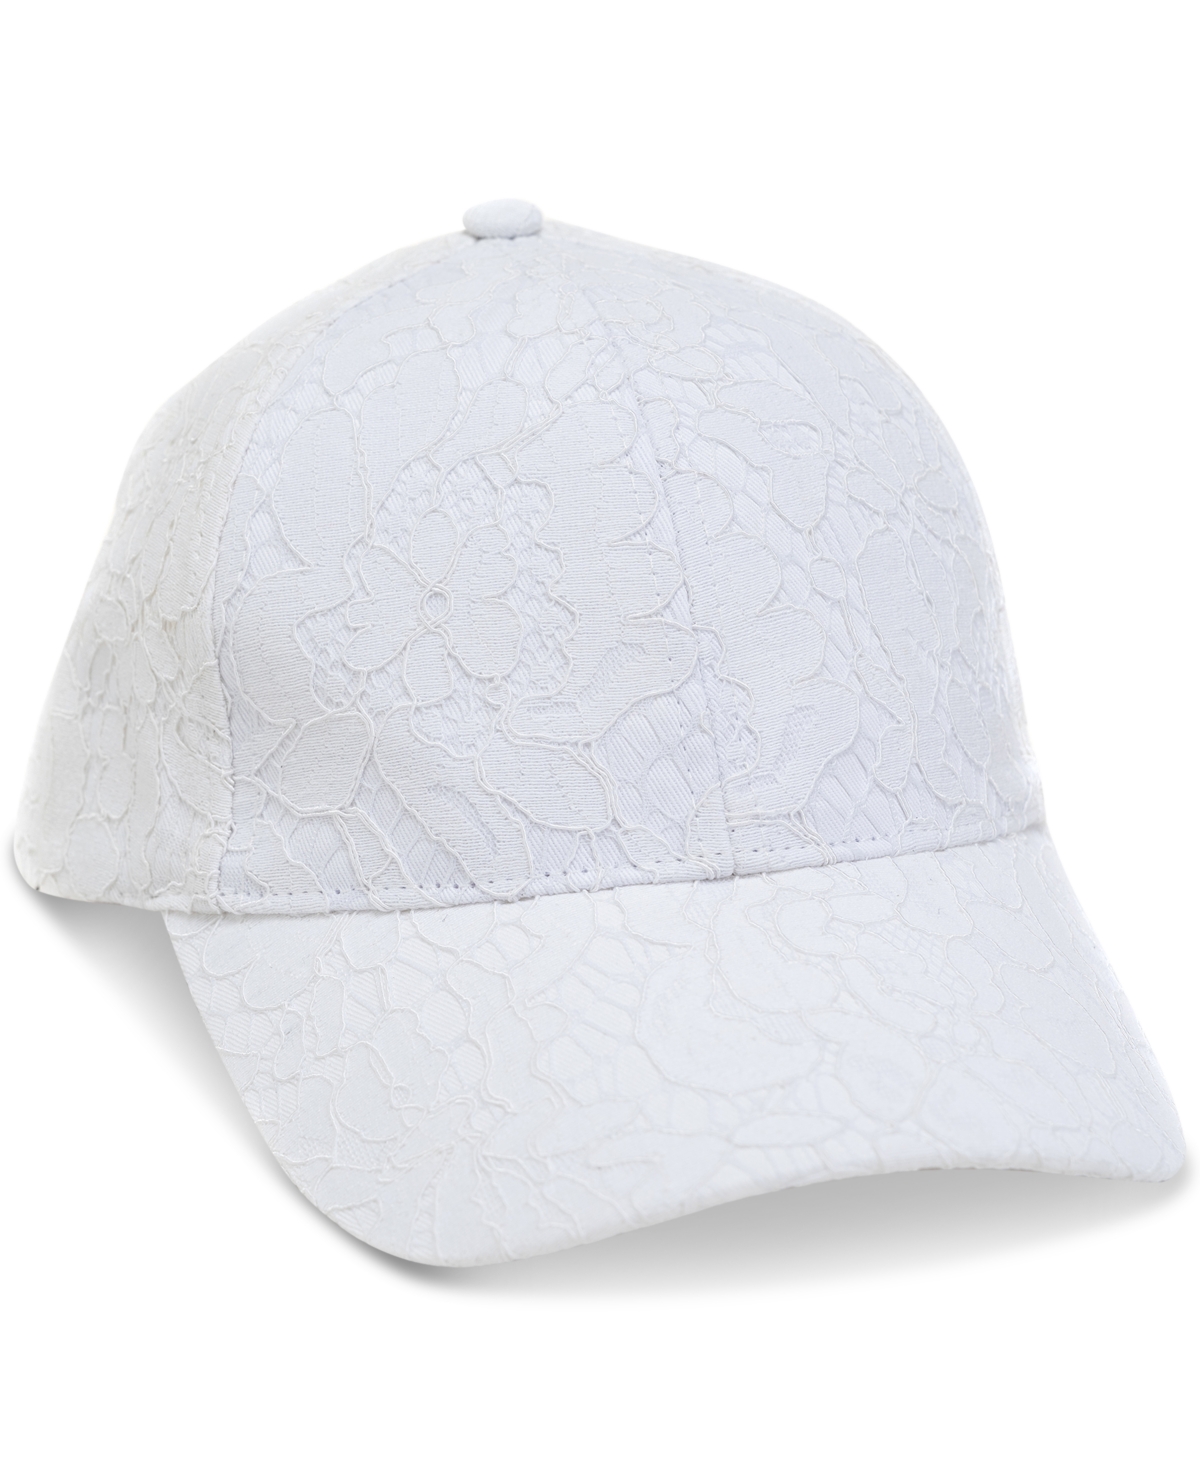 Collection Xiix Women's Lace Baseball Cap In White